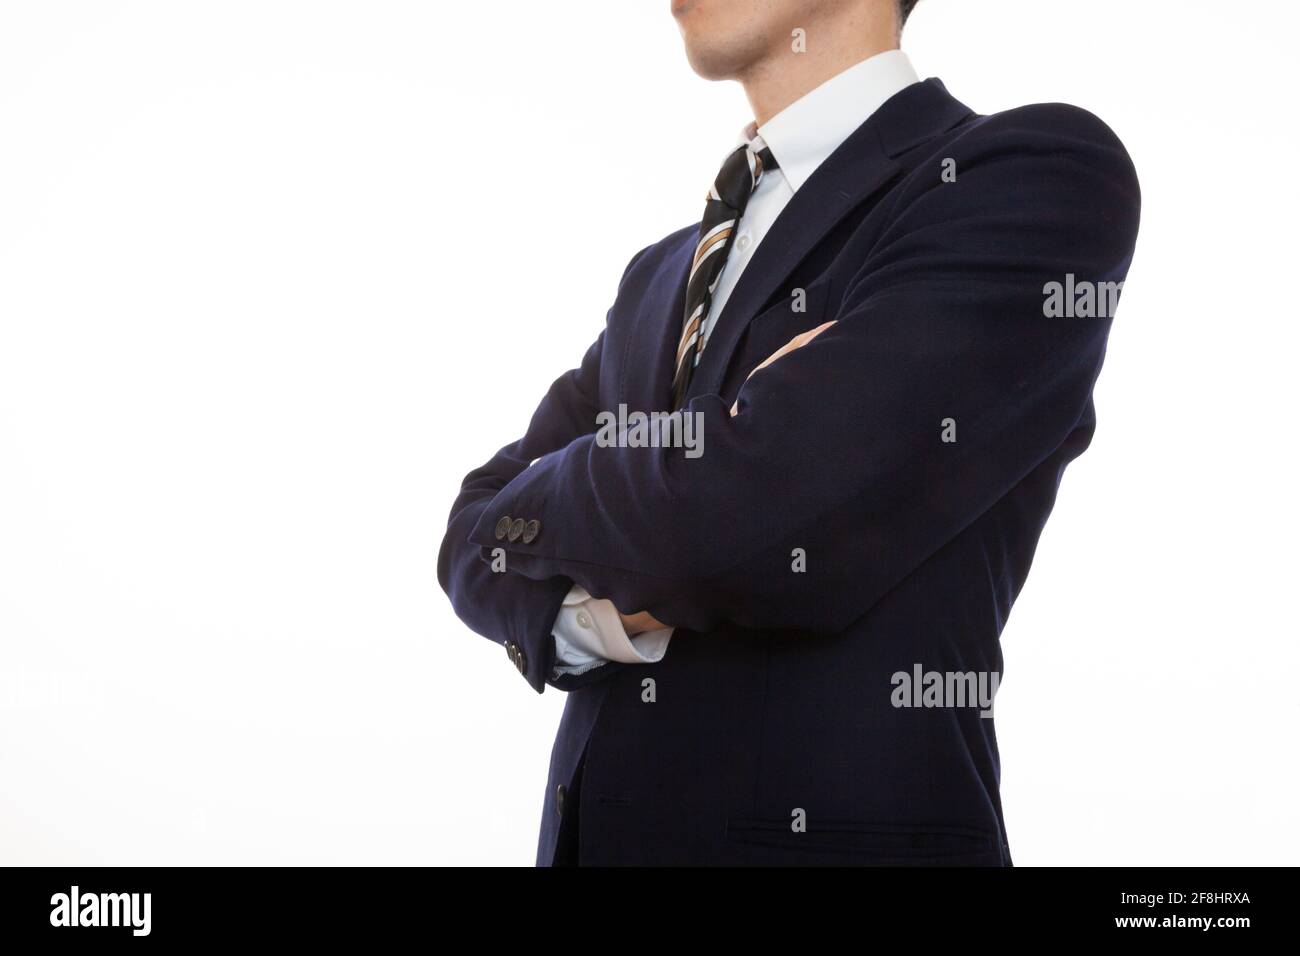 A dignified business person with arms folded Stock Photo